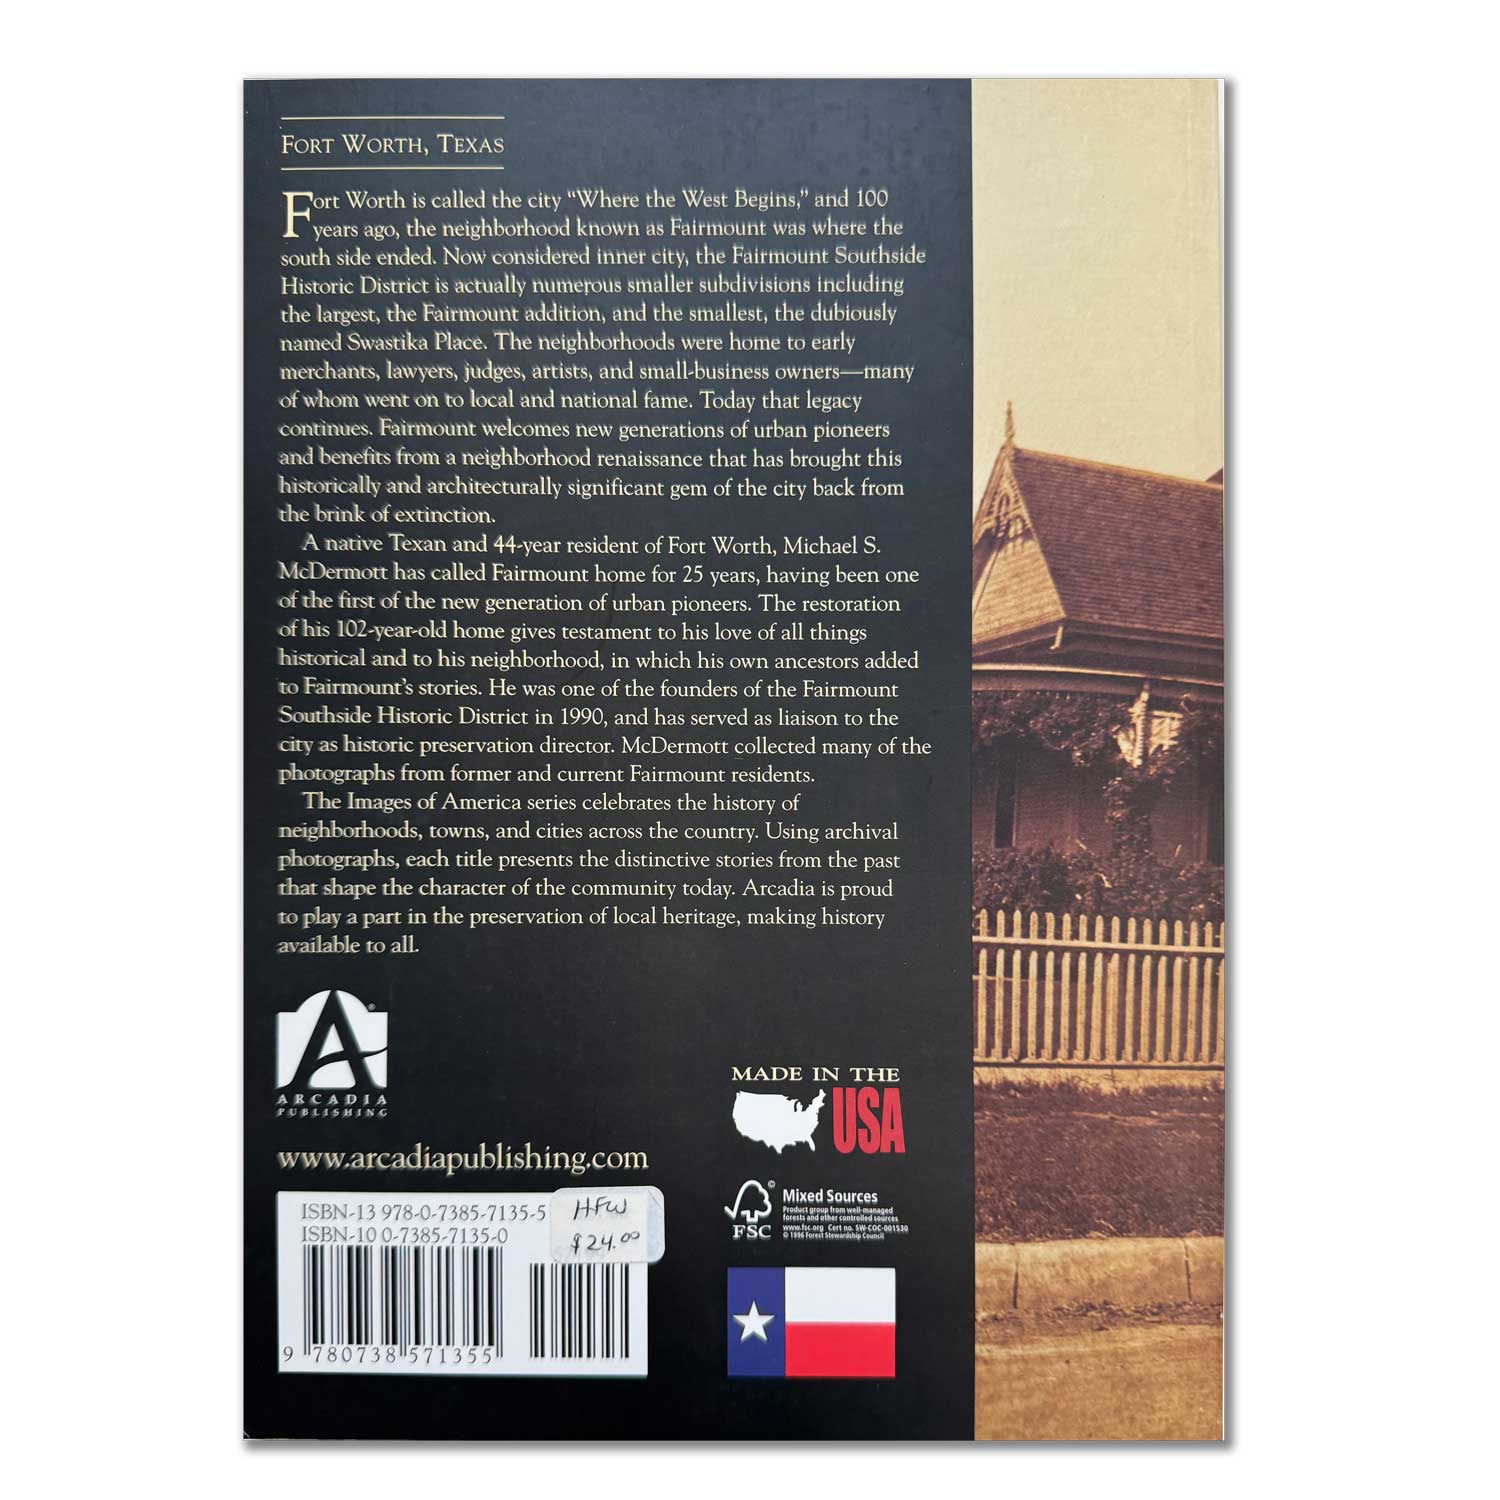 Fort Worth's Fairmount District Book Back Cover